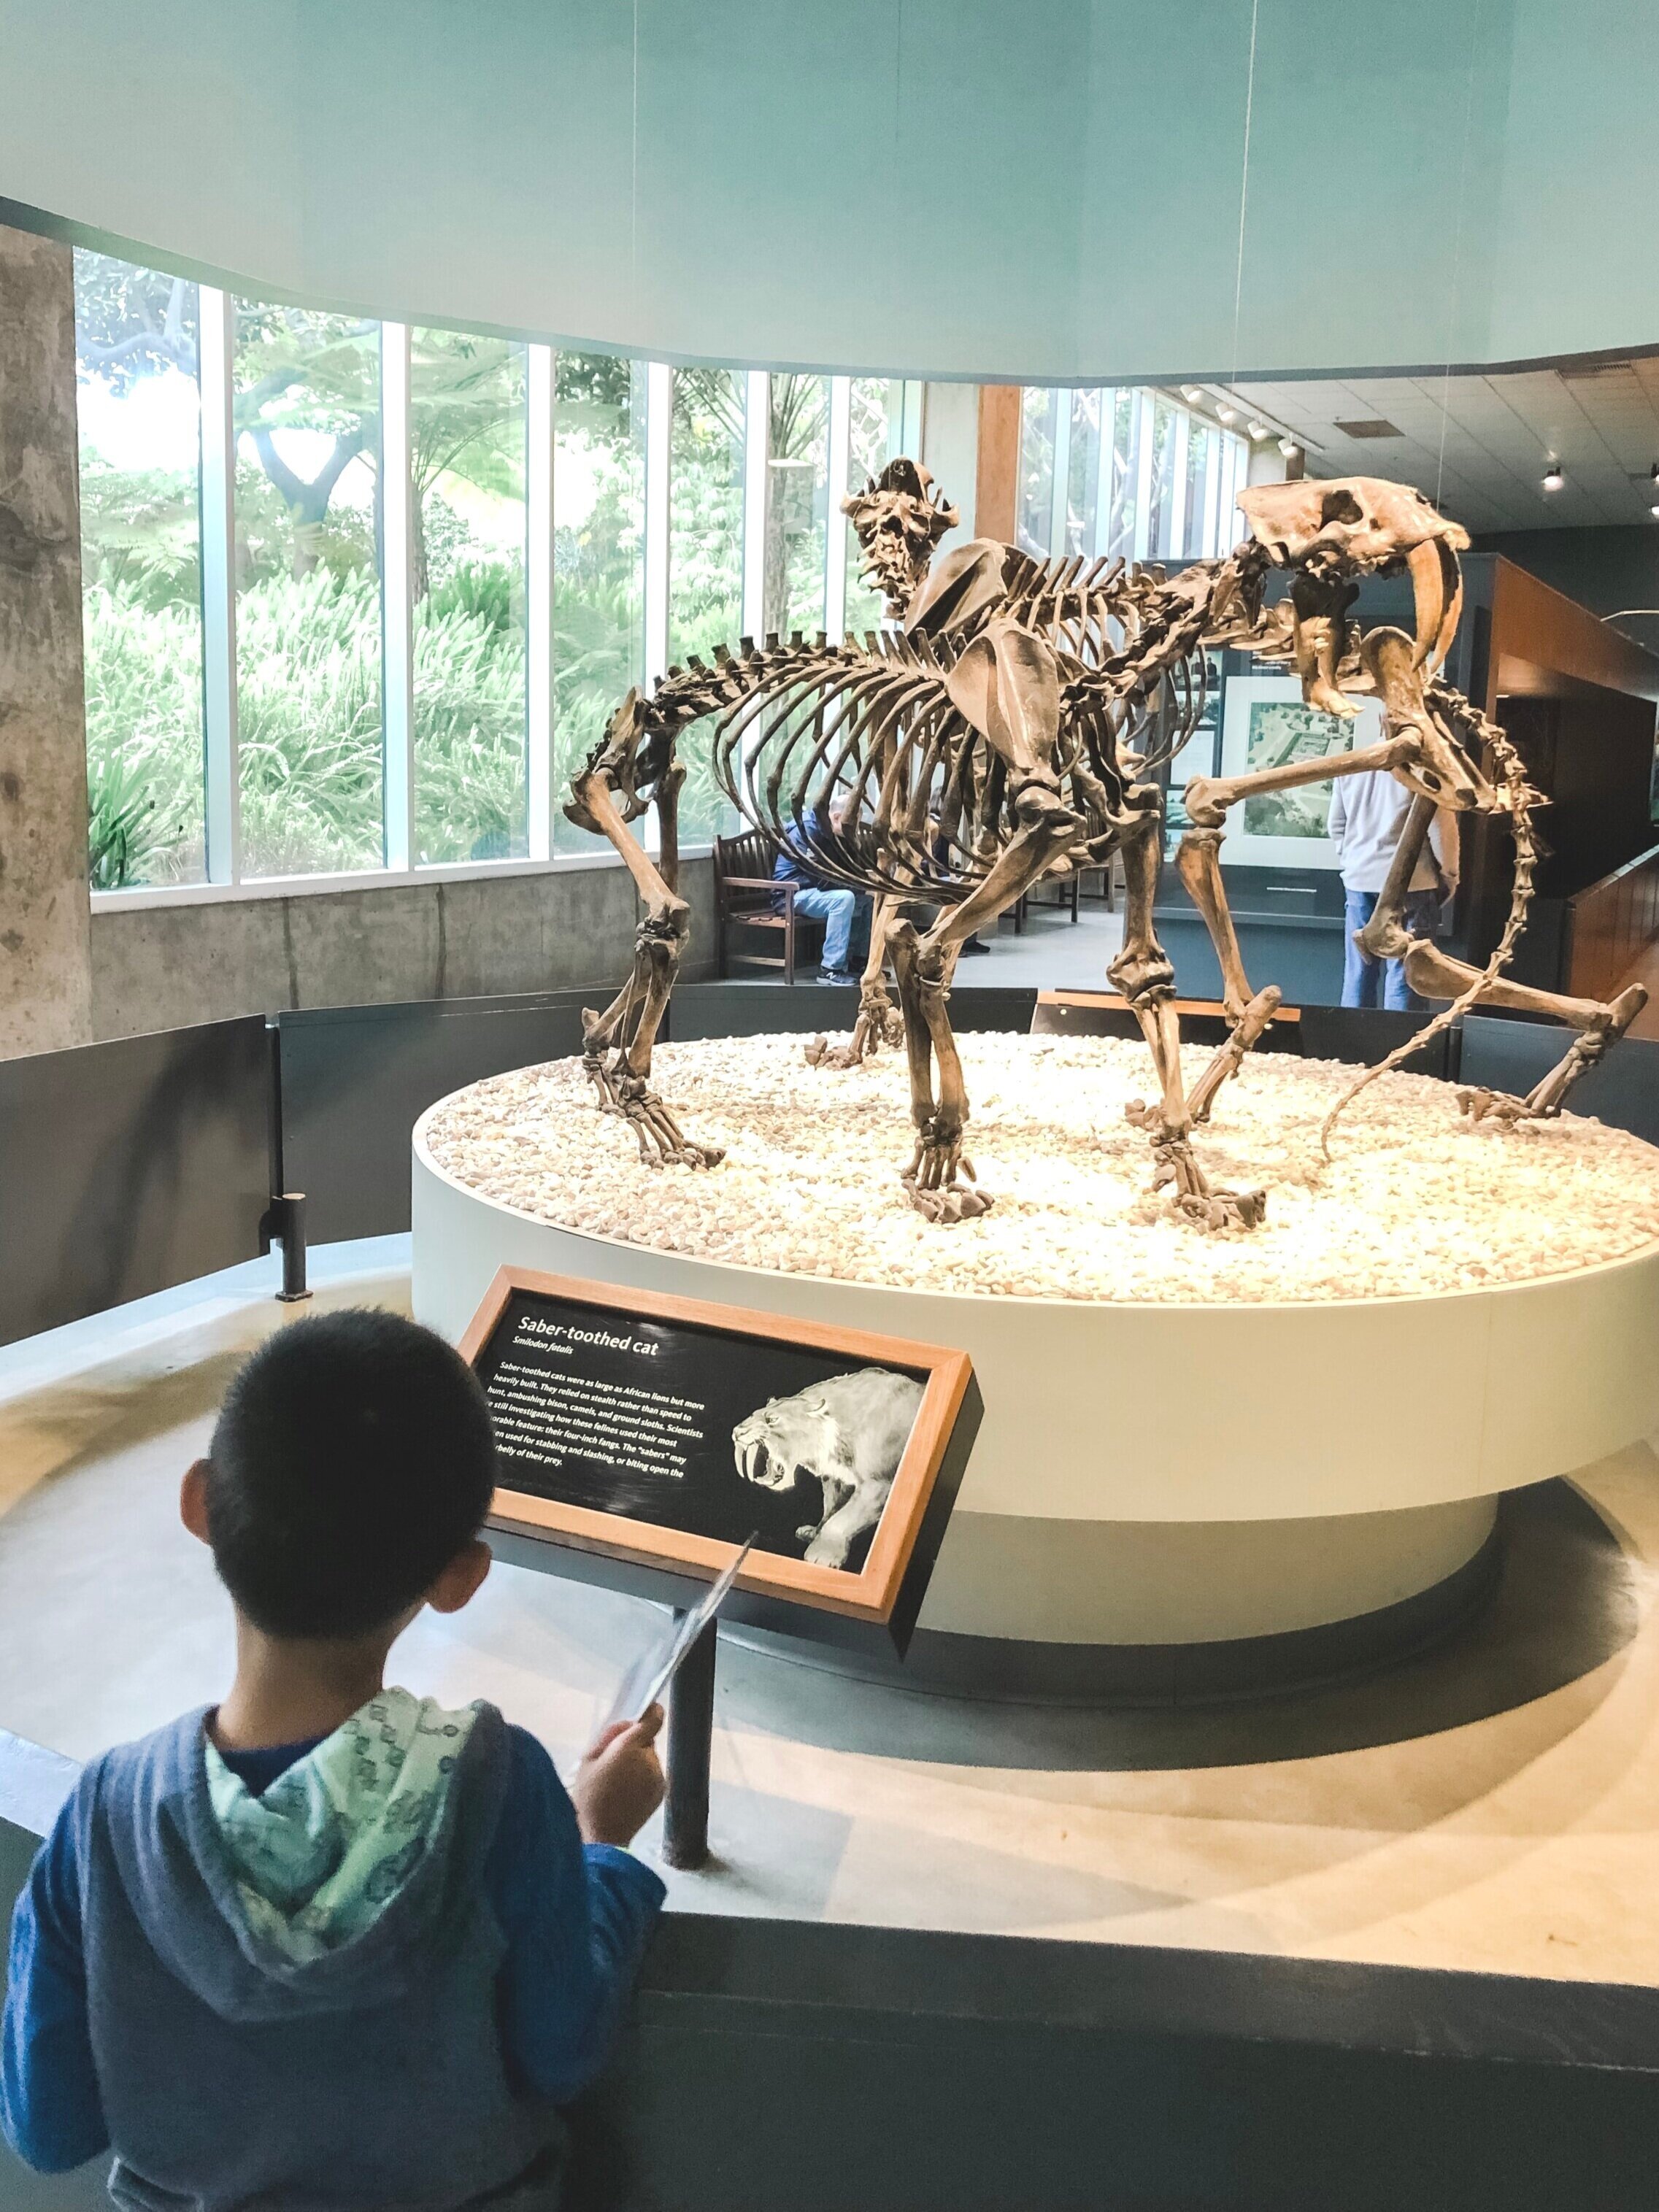  La Brea Tar Pits on Hello Rascal Kids. Family Lifestyle website for parents and kids. 